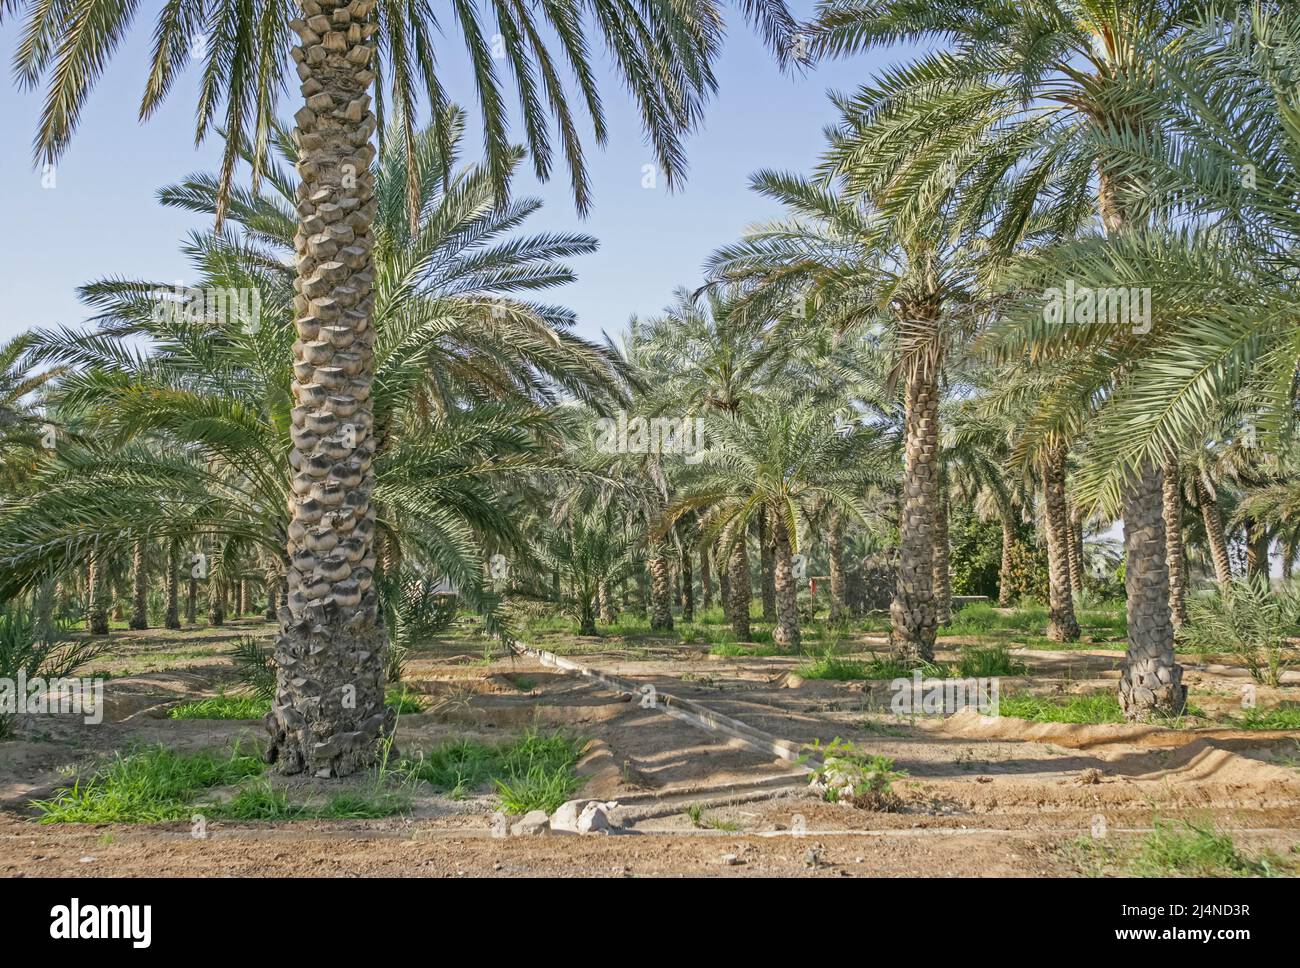 A date plantation with a traditional falaj, or irrigation channel, at Dhaid in the Emirate of Sharjah in the United Arab Emirates. Stock Photo